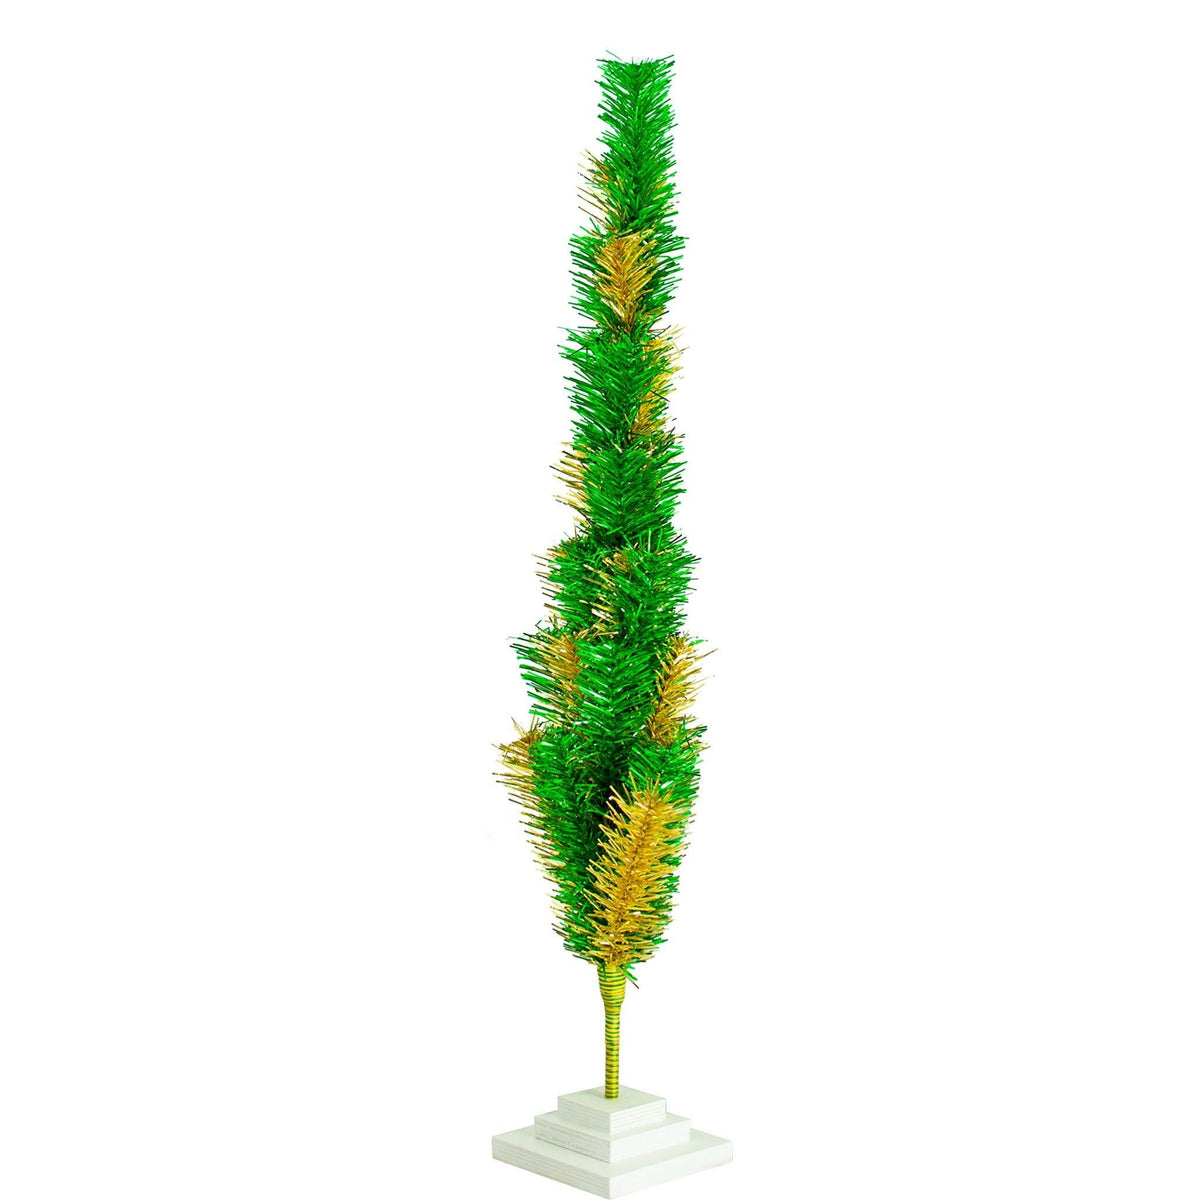 Introducing Lee Display's brand new St. Patrick's Day Themed Mixed Tinsel Christmas Trees made by hand in the USA!    Celebrate the luck of the Irish spirit with a Shamrock-Green and Gold-colored Tinsel Christmas Tree.  Shop now at leedisplay.com